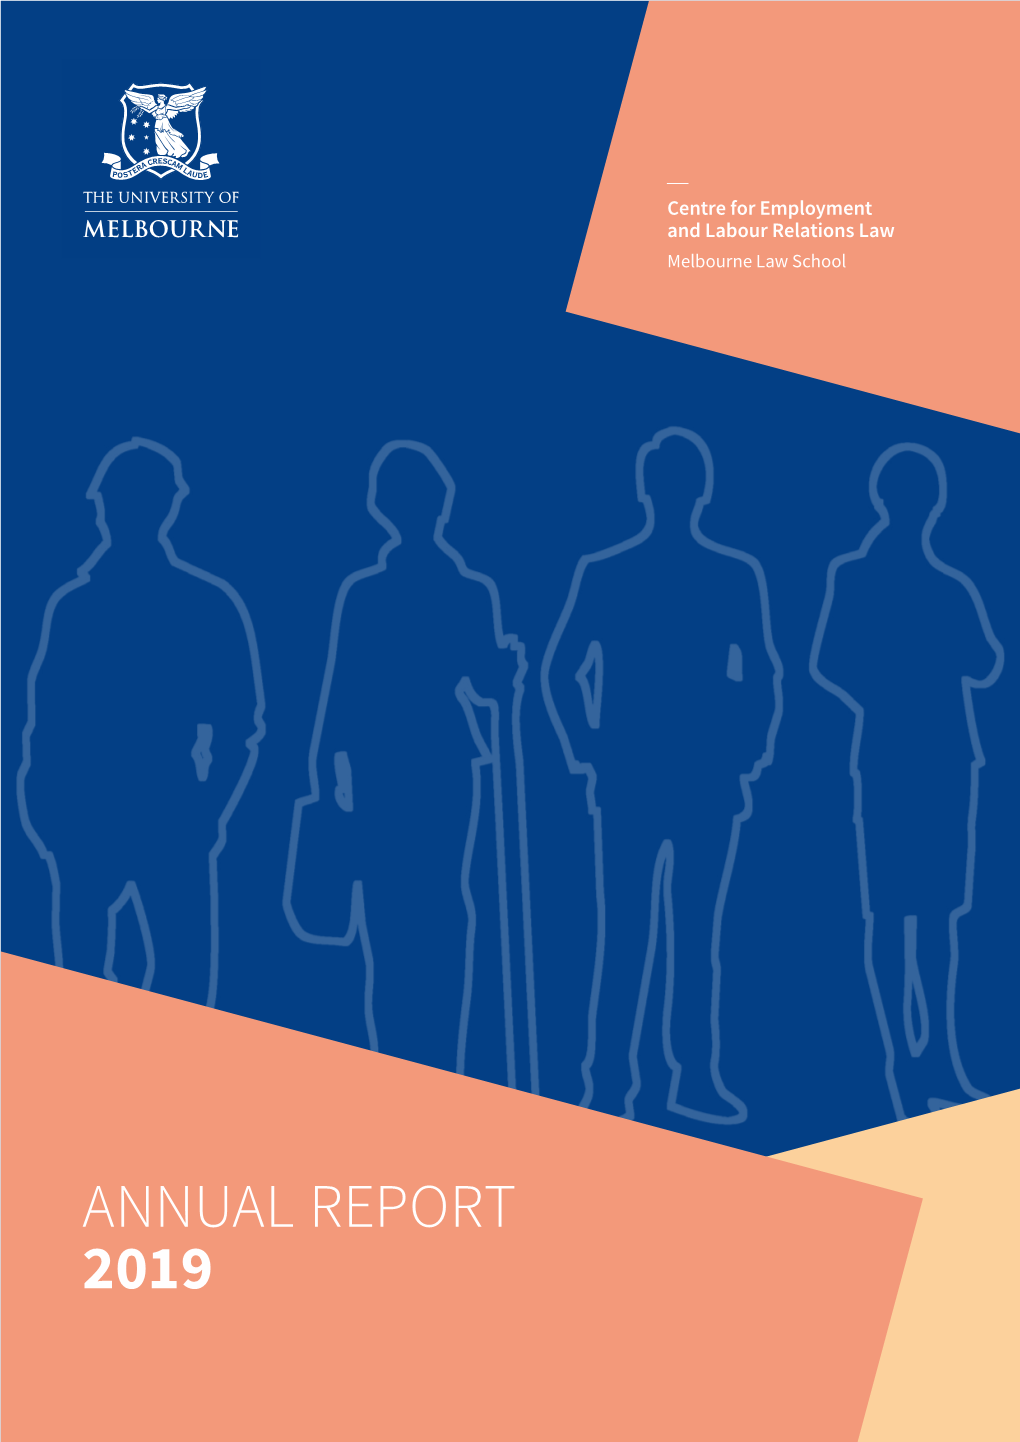 ANNUAL REPORT 2019 Centre for Employment and Labour Relations Law Melbourne Law School the University of Melbourne Annual Report January–December 2019